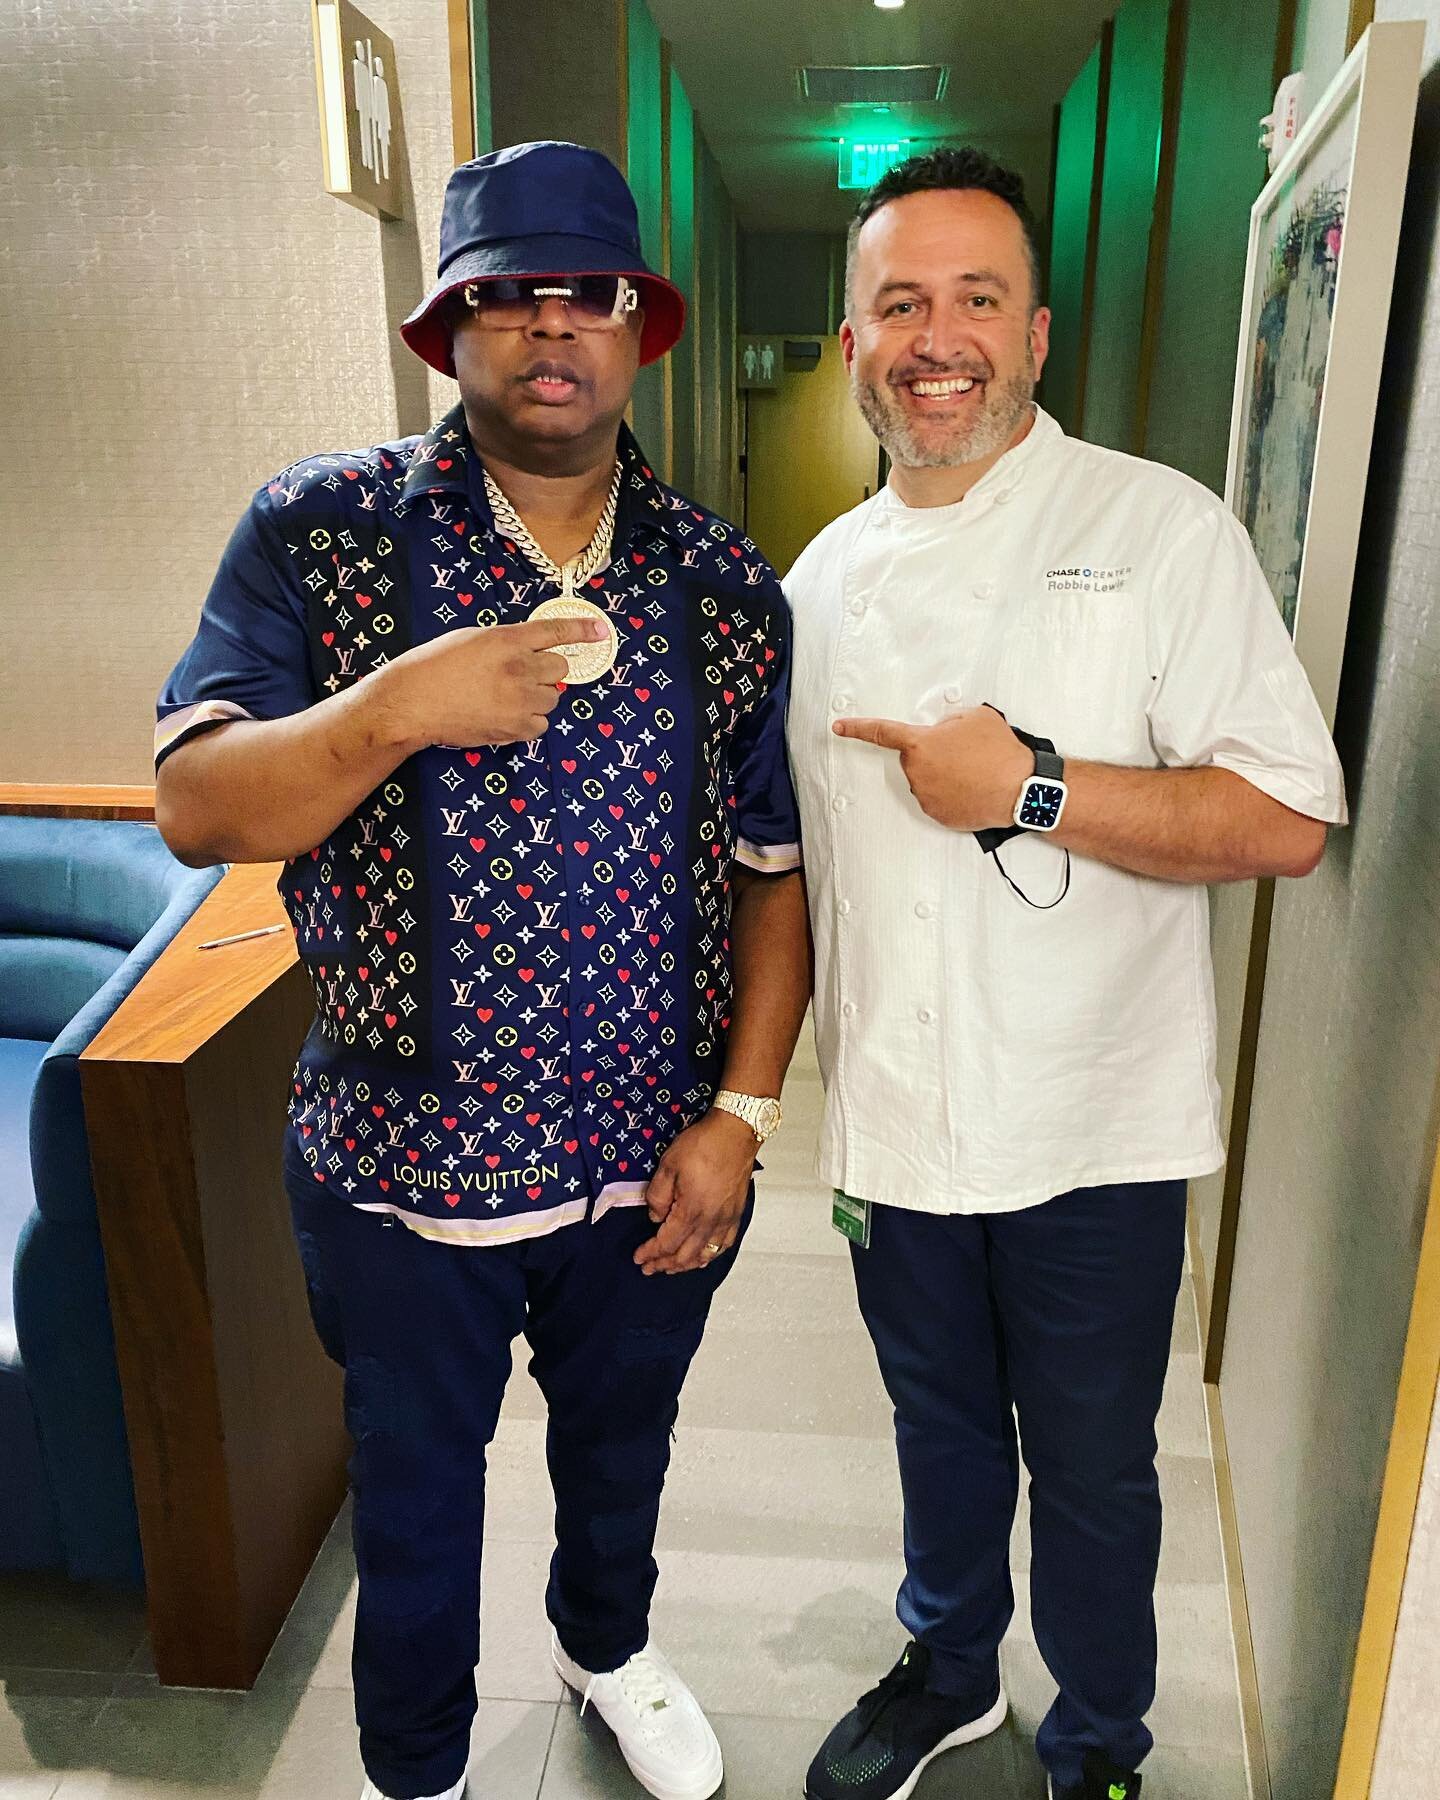 Just checking in with #DubNation&lsquo;s own, @e40, on what #culinarymagic he has in store for us 🔥

#bayarea #goodeats #culinaryfamily #chasecenter #nbafinals #tasteofchasecenter